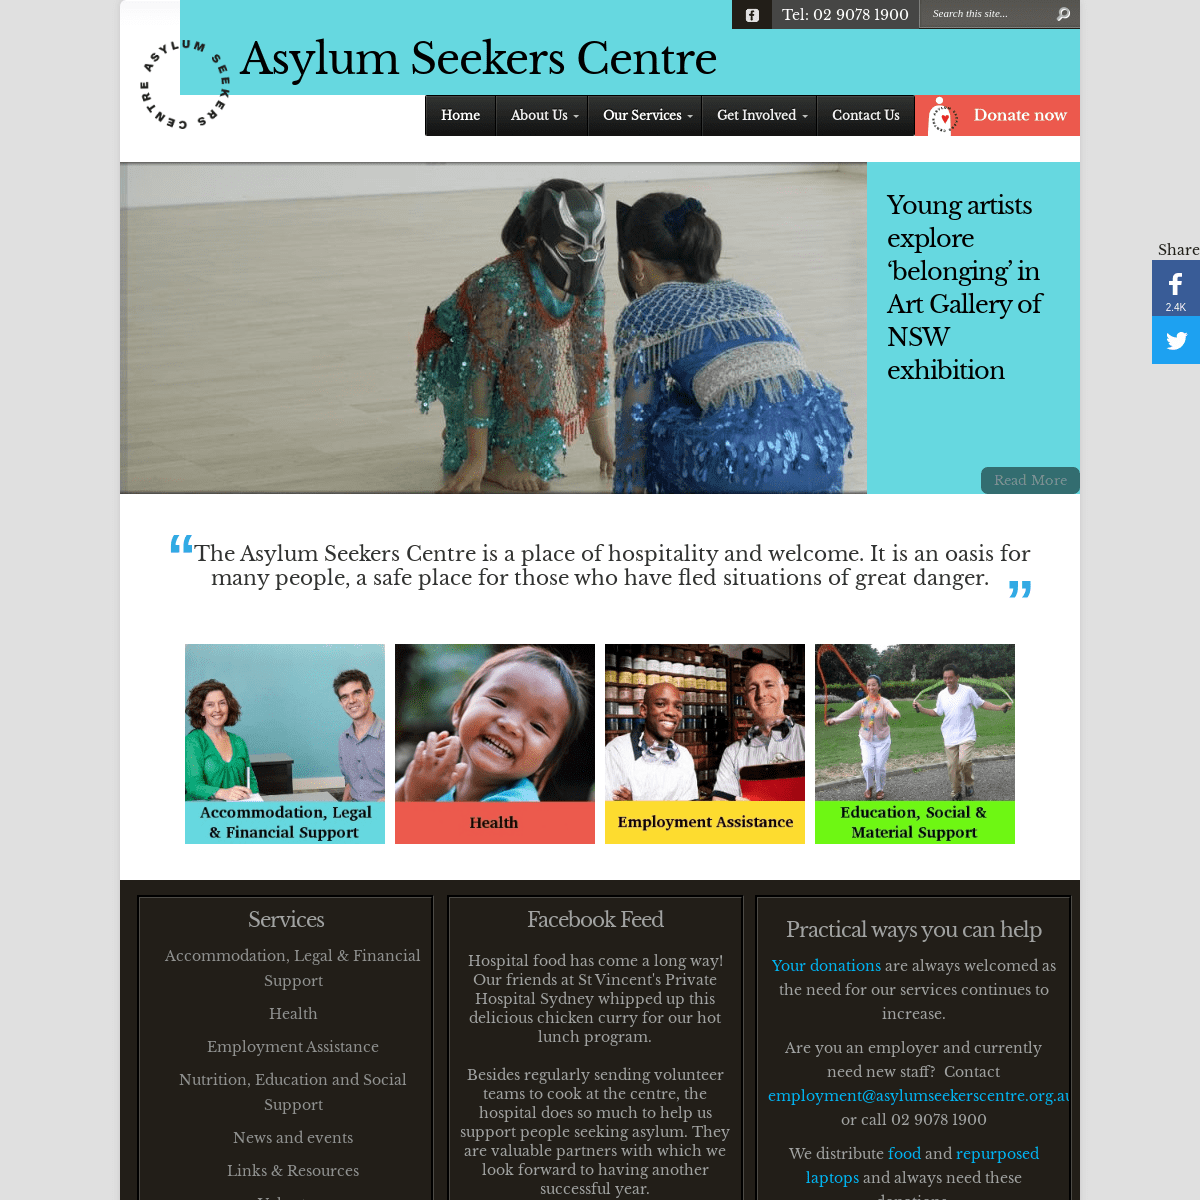 A complete backup of asylumseekerscentre.org.au